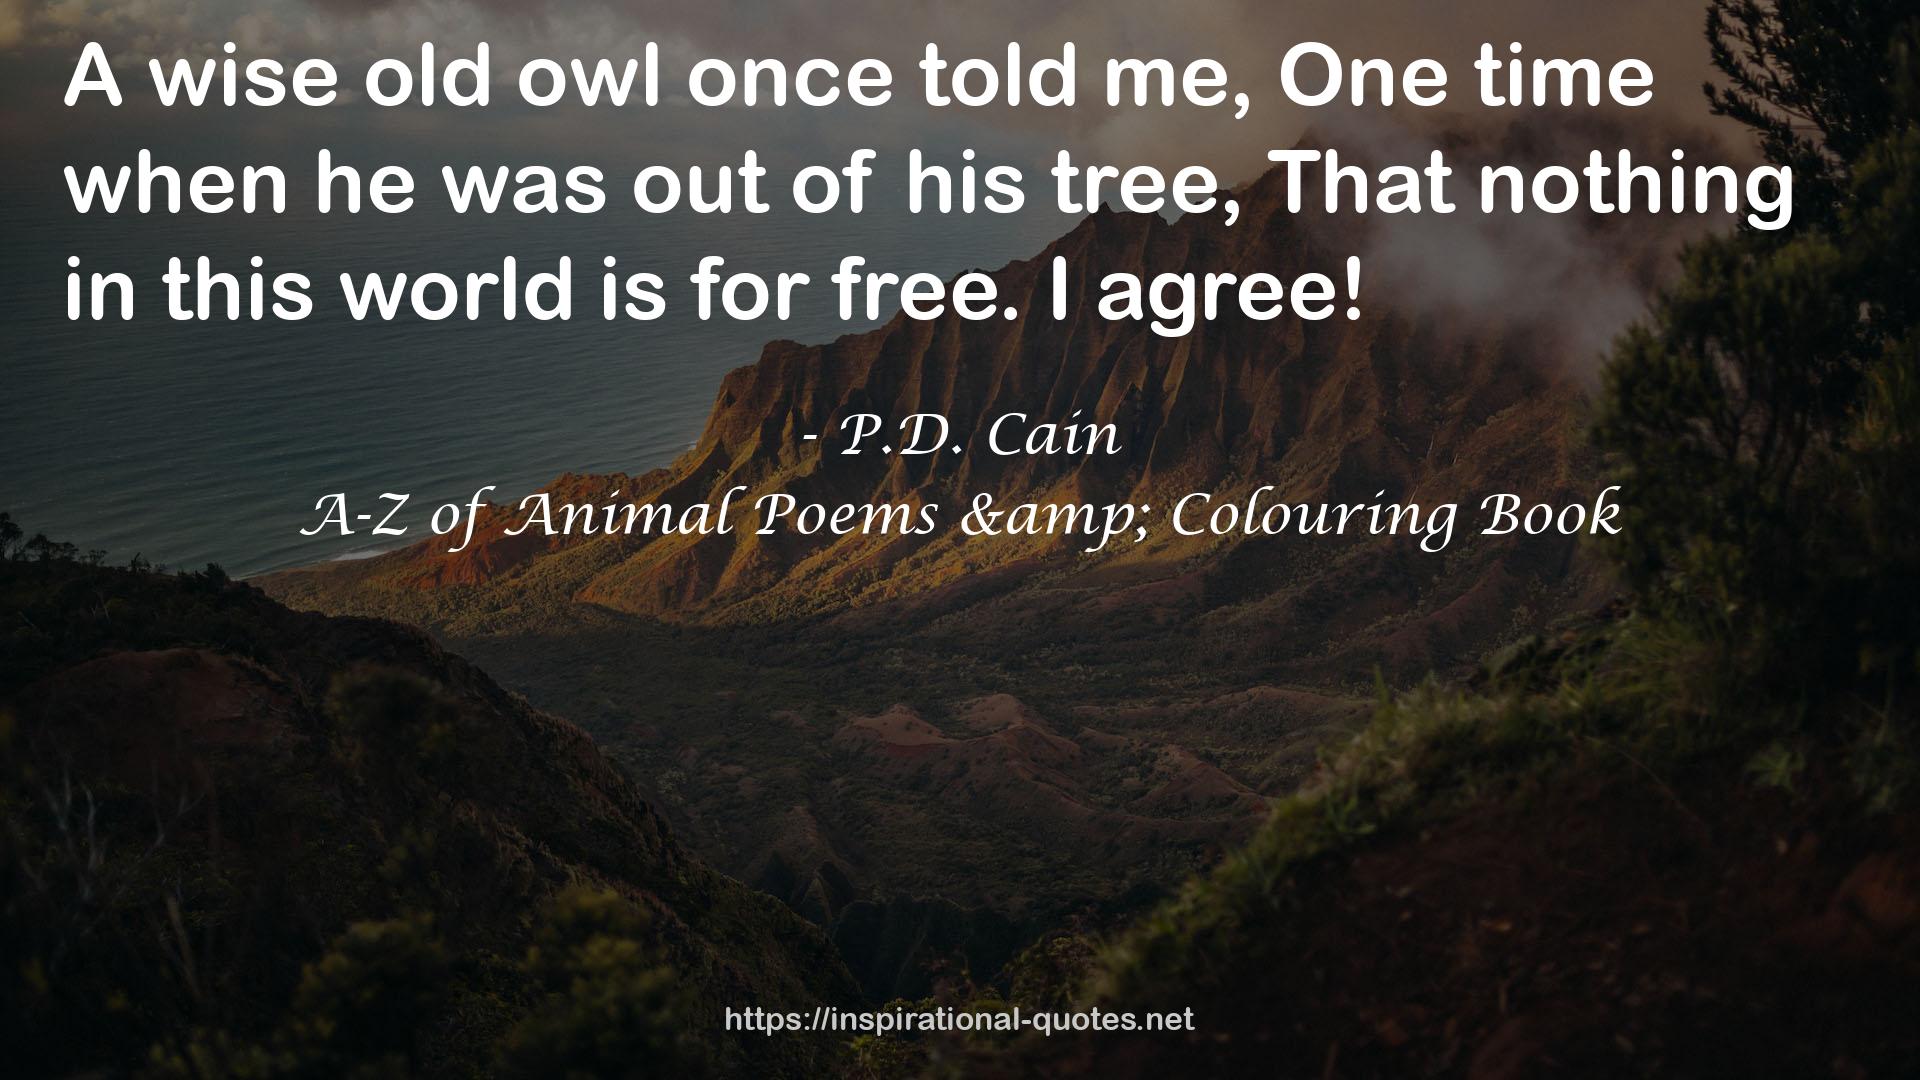 A-Z of Animal Poems & Colouring Book QUOTES